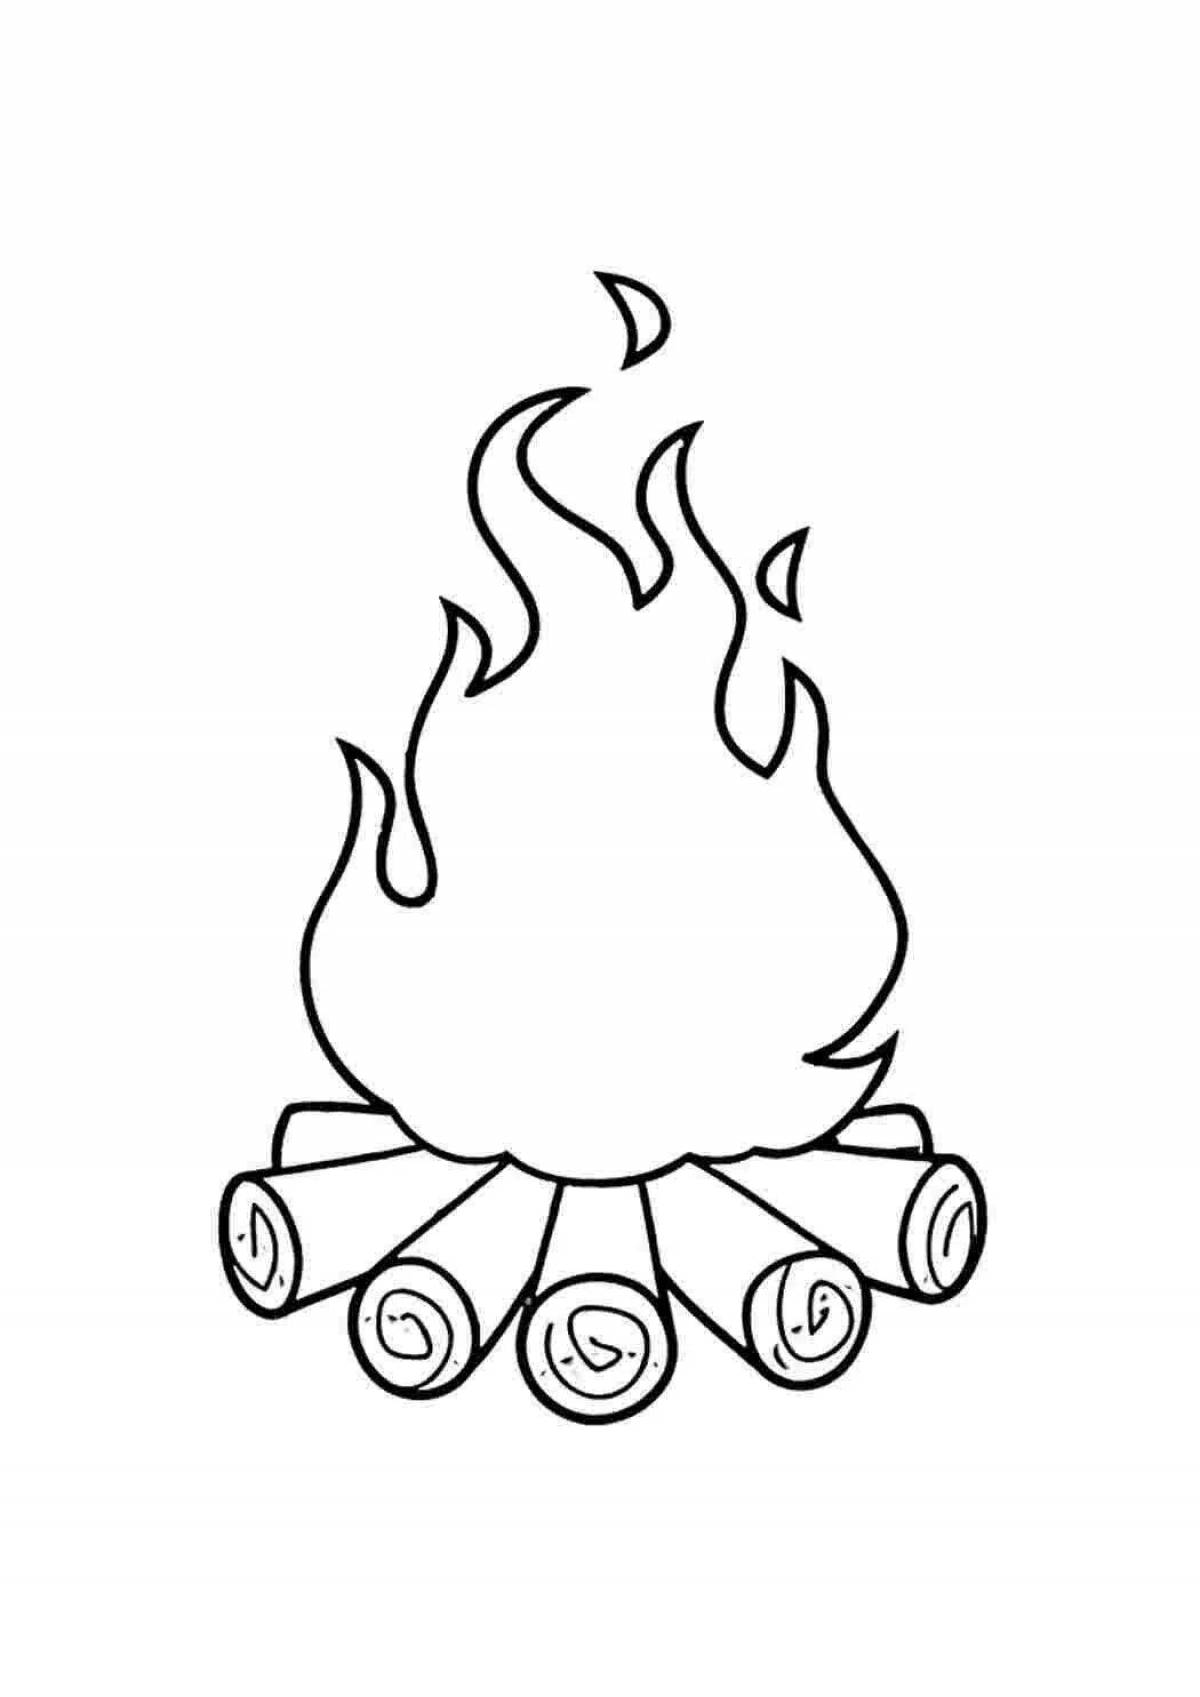 Fantastic fire coloring book for 3-4 year olds